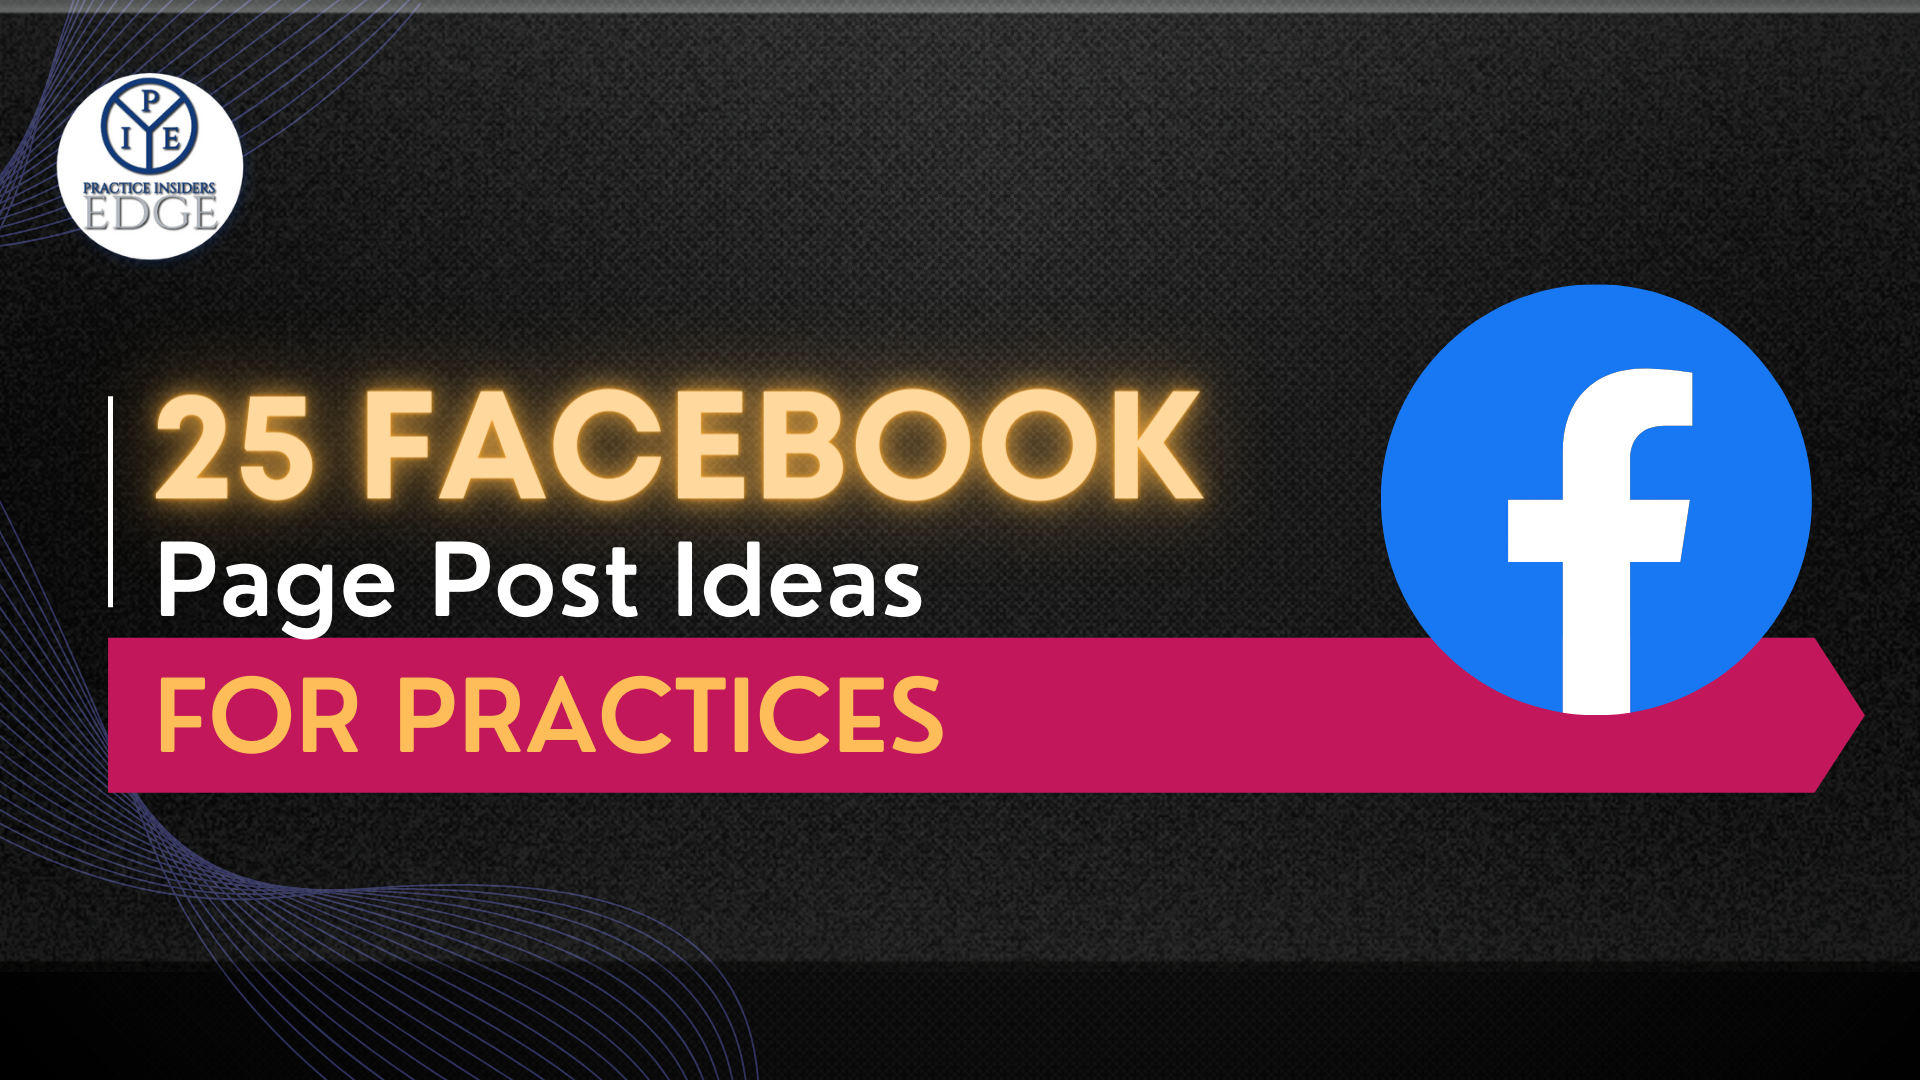 25 Facebook Page Post Ideas For Practices